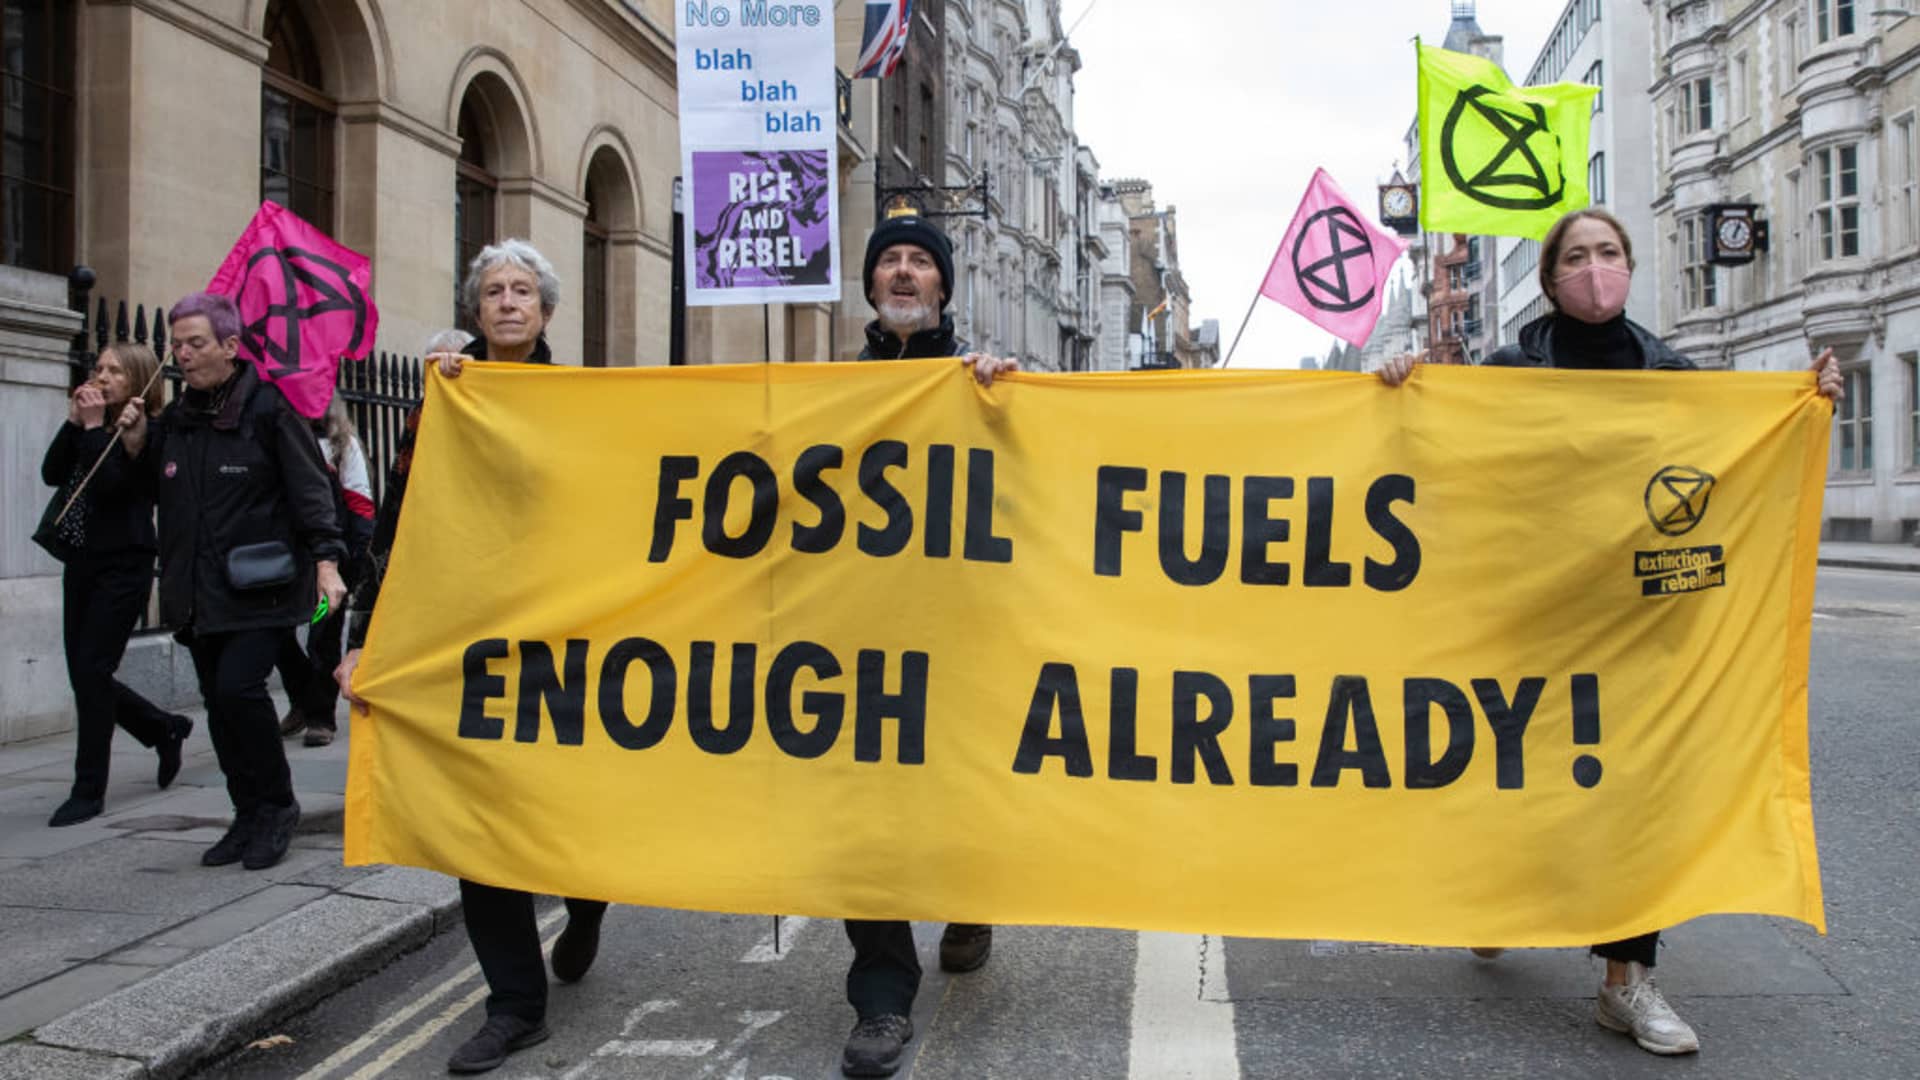 Extinction Rebellion climate activists take part in a Rise and Rebel march organised to coincide with the end of, and anticipated failure of, the COP26 climate summit on 13th November 2021 in London, United Kingdom.